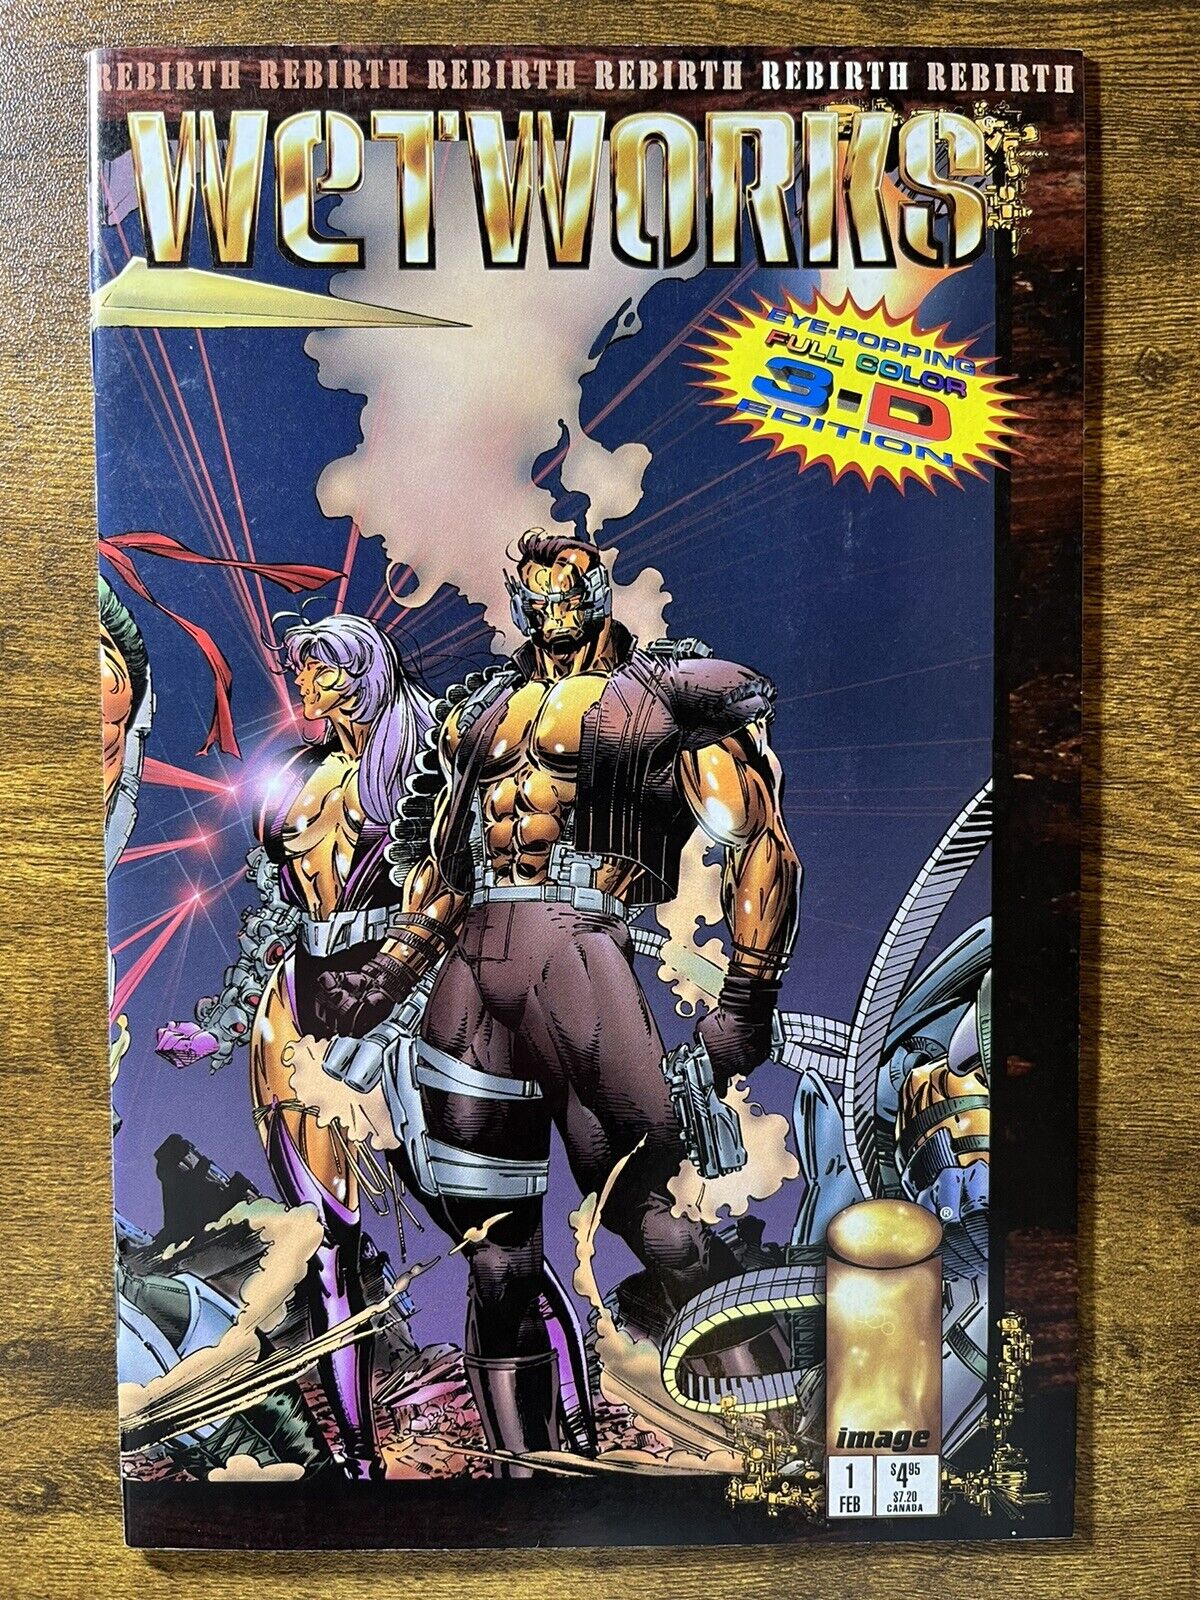 WETWORKS 1 WHILCE PORTAIO COVER 3-D VARIANT W/ 3-D GLASSES IMAGE COMICS 1998